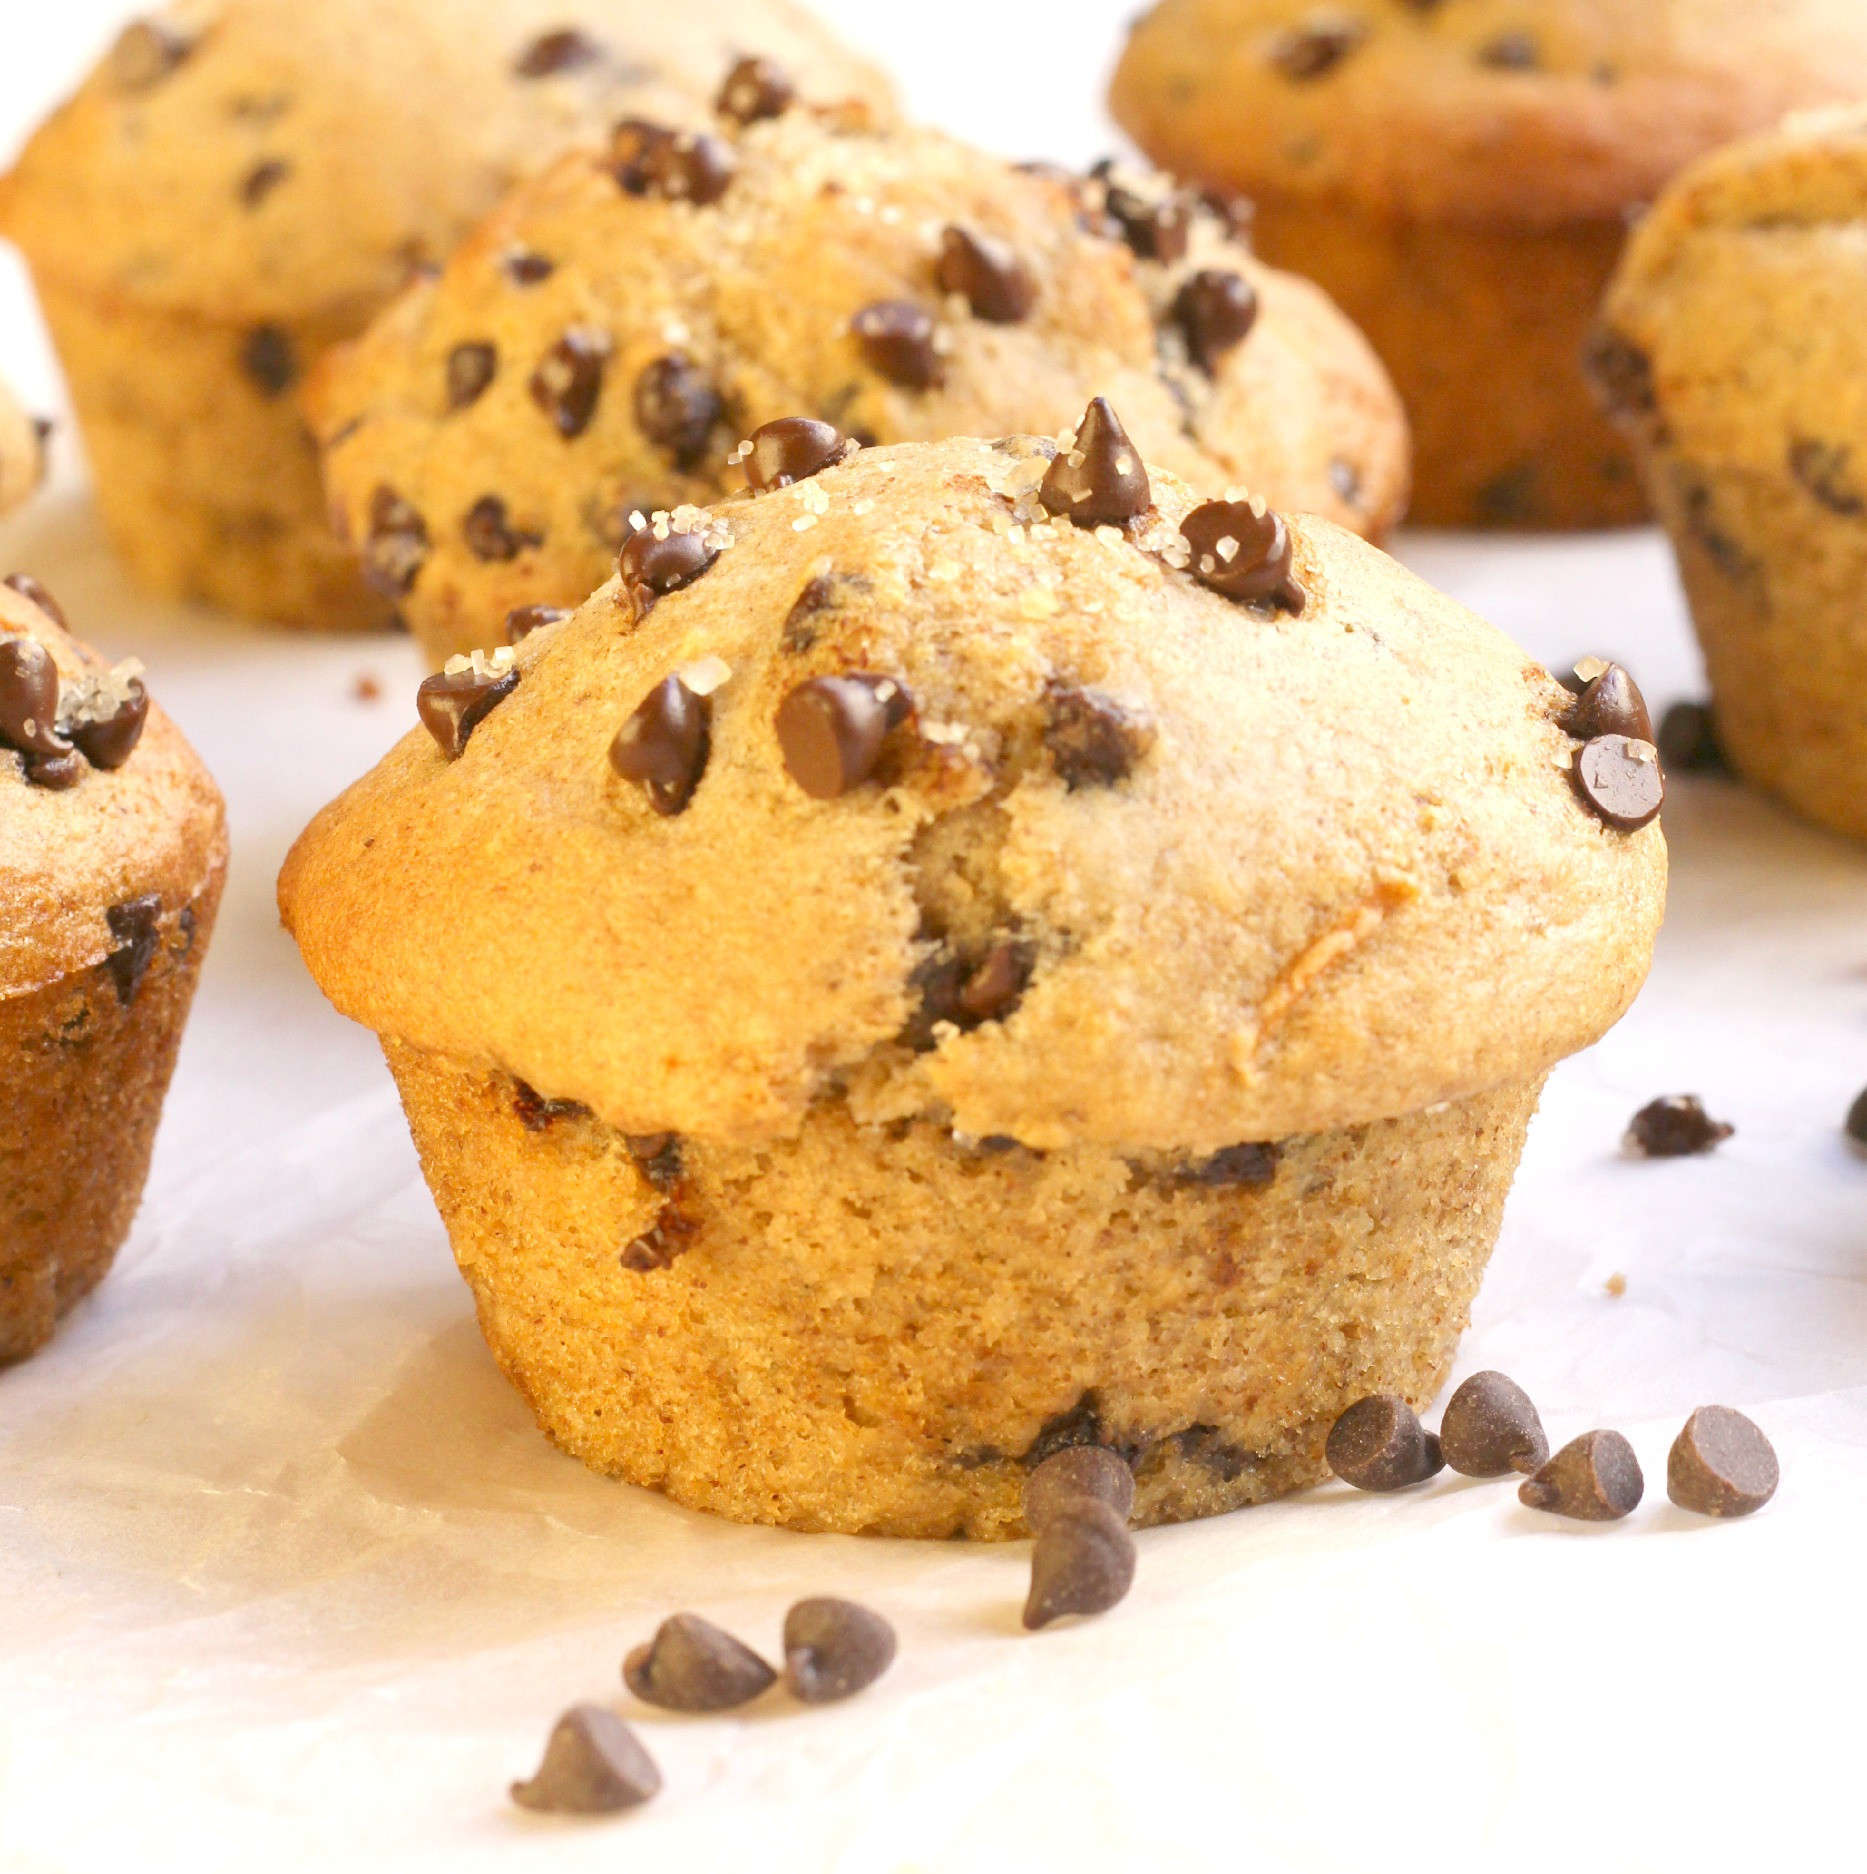 Chocolate Chip Muffins Healthy
 Healthy Chocolate Chip Muffins Bakery Style